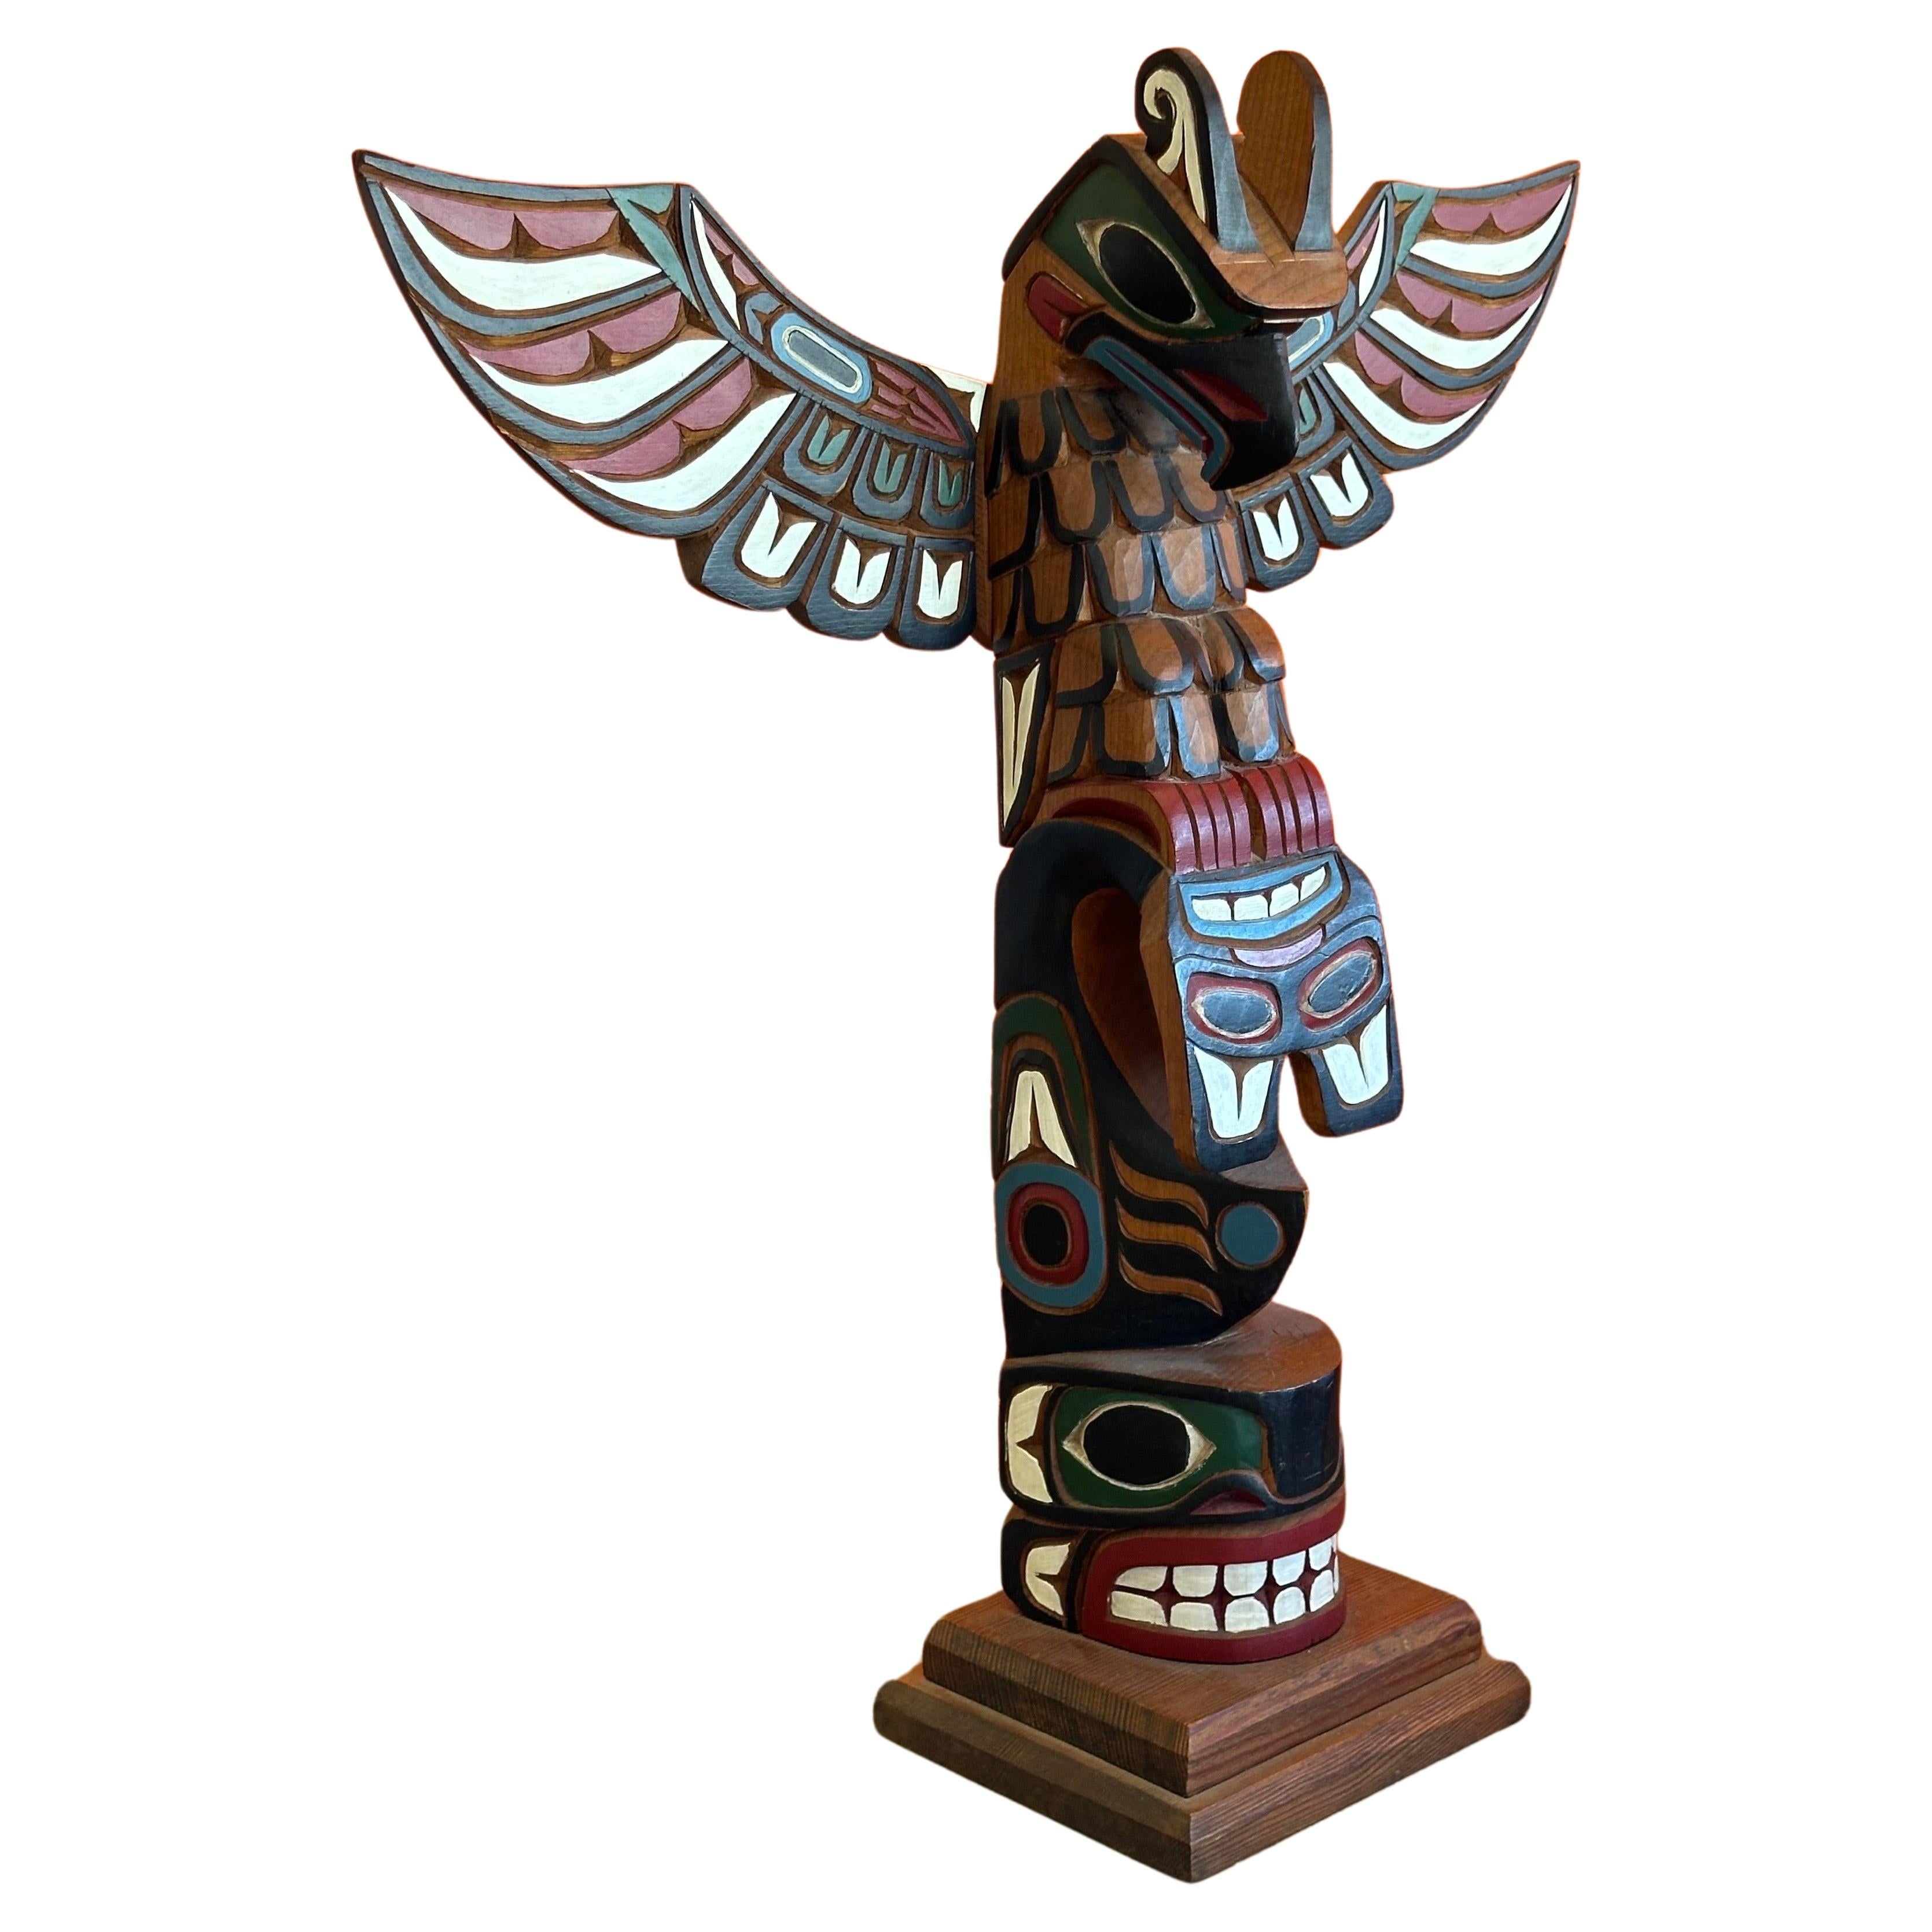 A fine example of a Salish northwest coast American Indian hand carved wood totem pole by master carver Gary Rice, circa 1980s. The Totem stands and 19.5